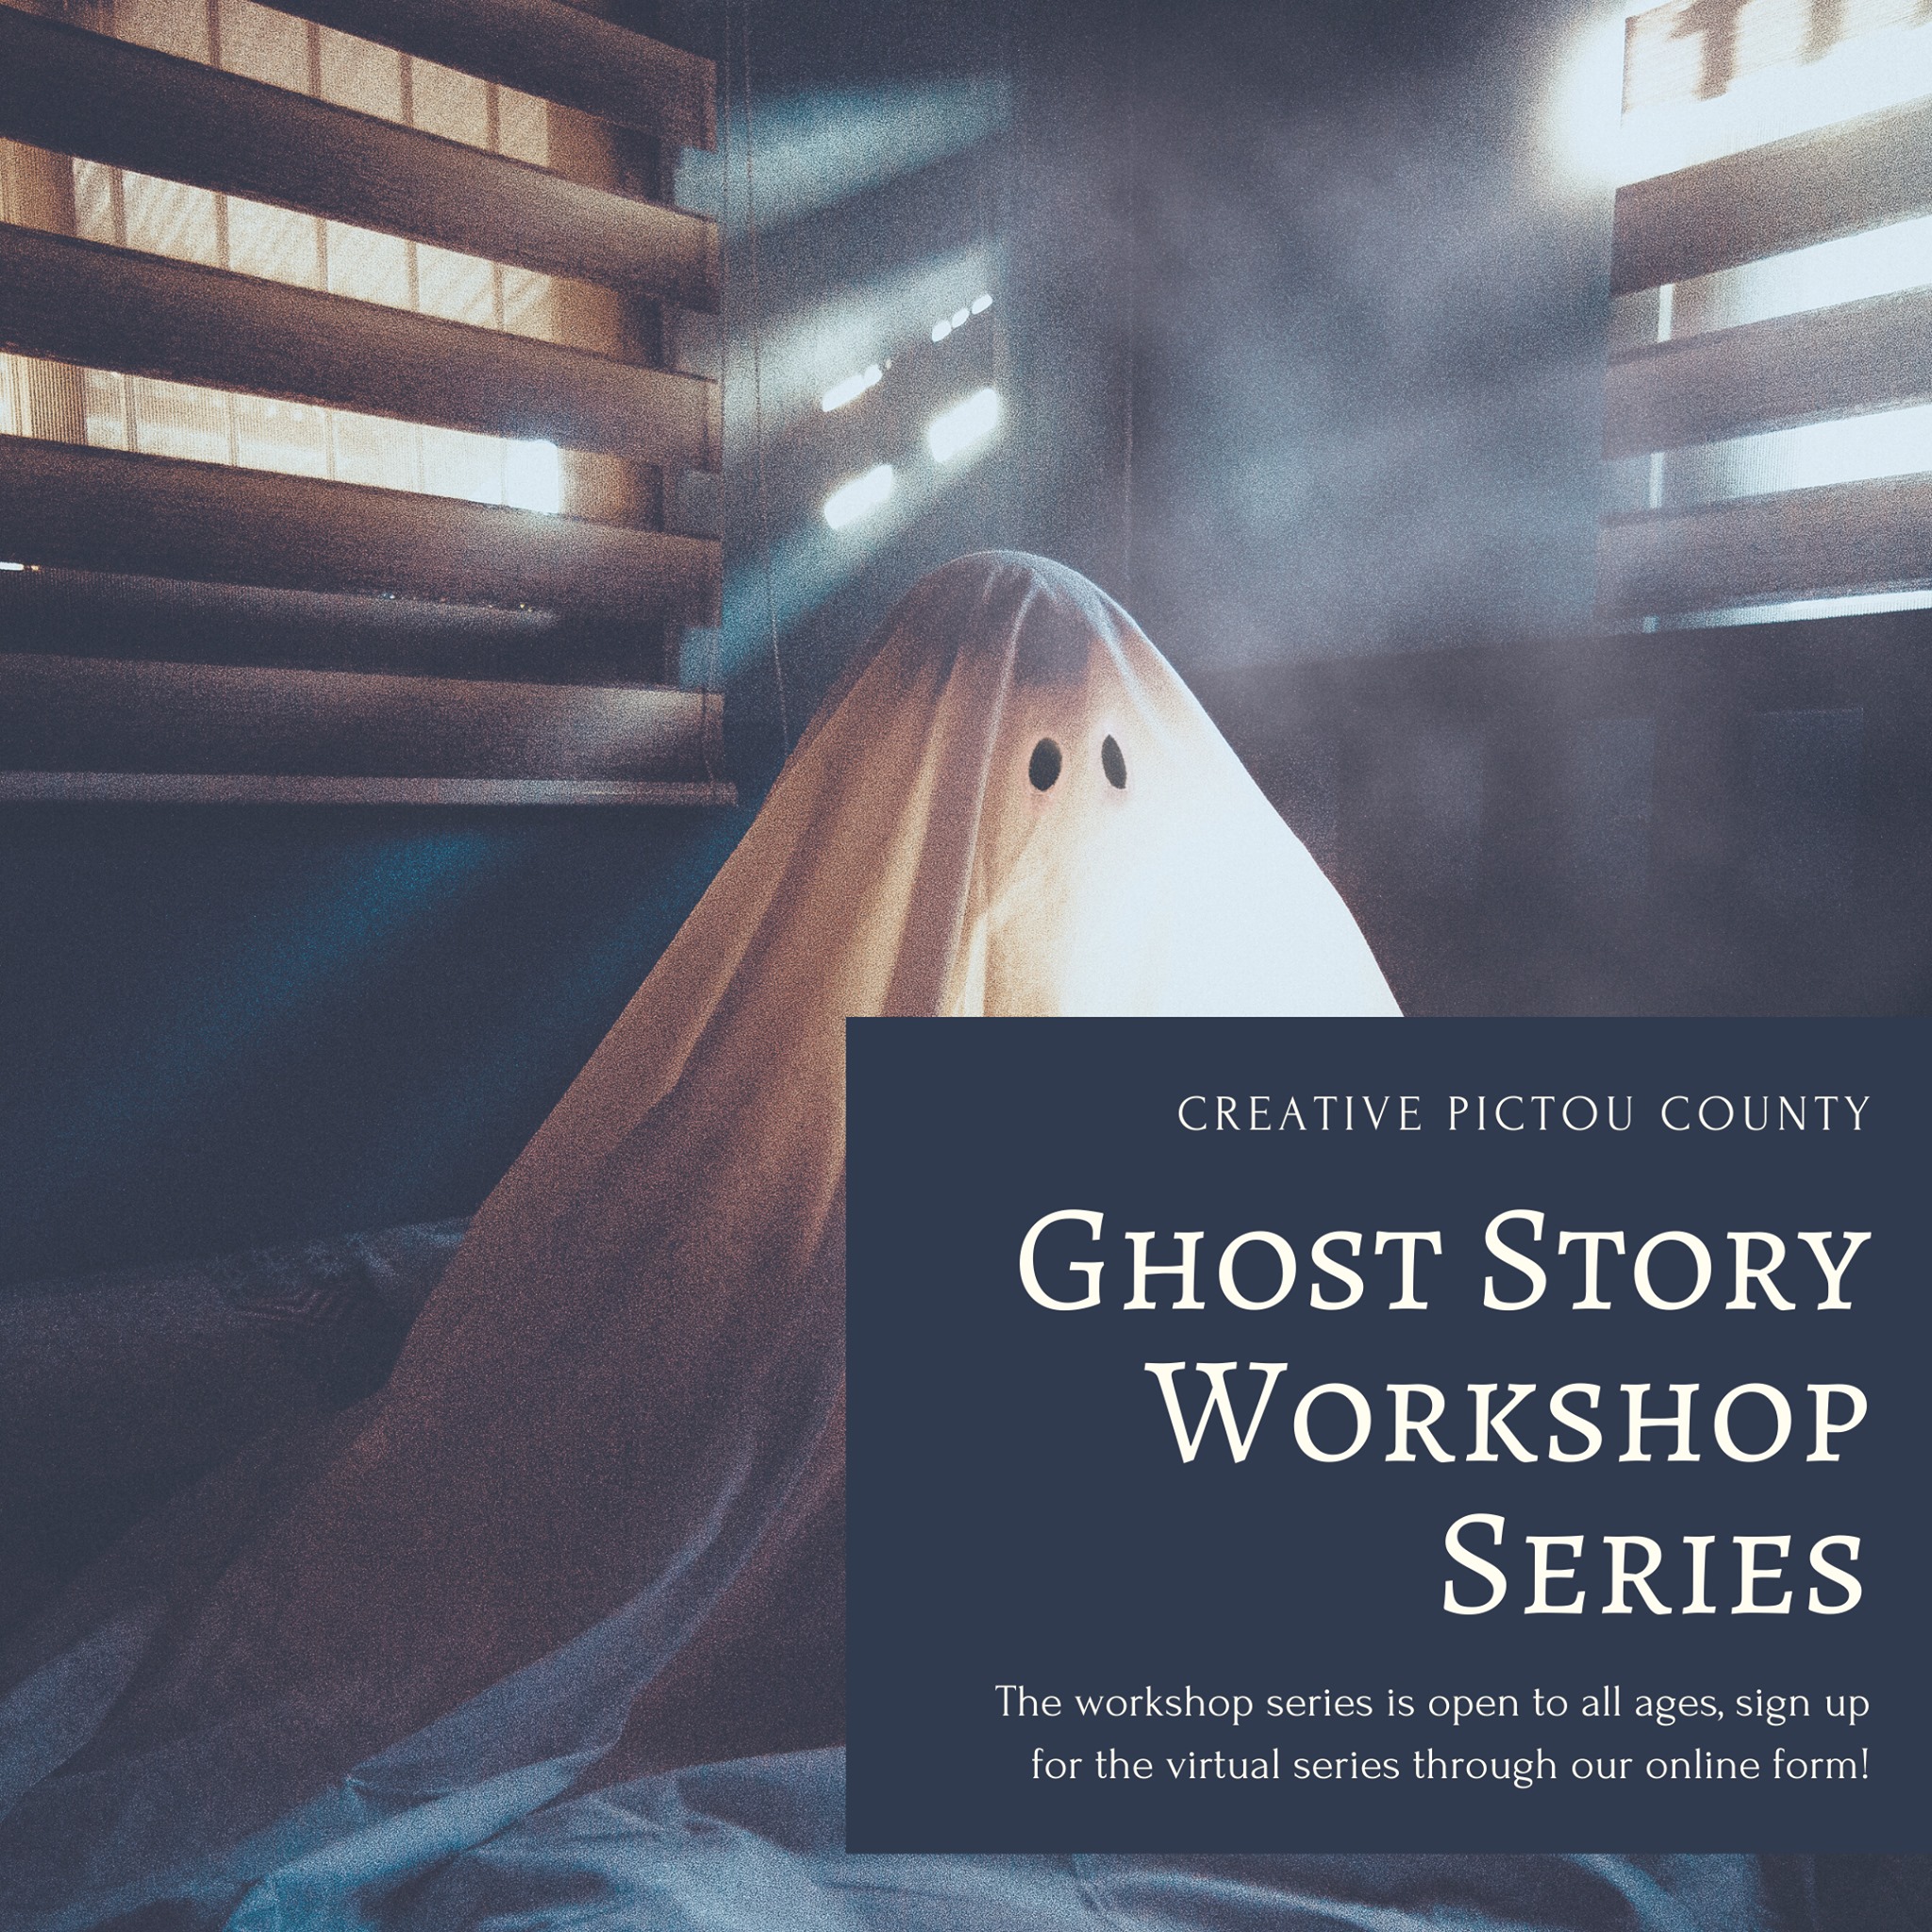 creative pictou county ghost story workshop